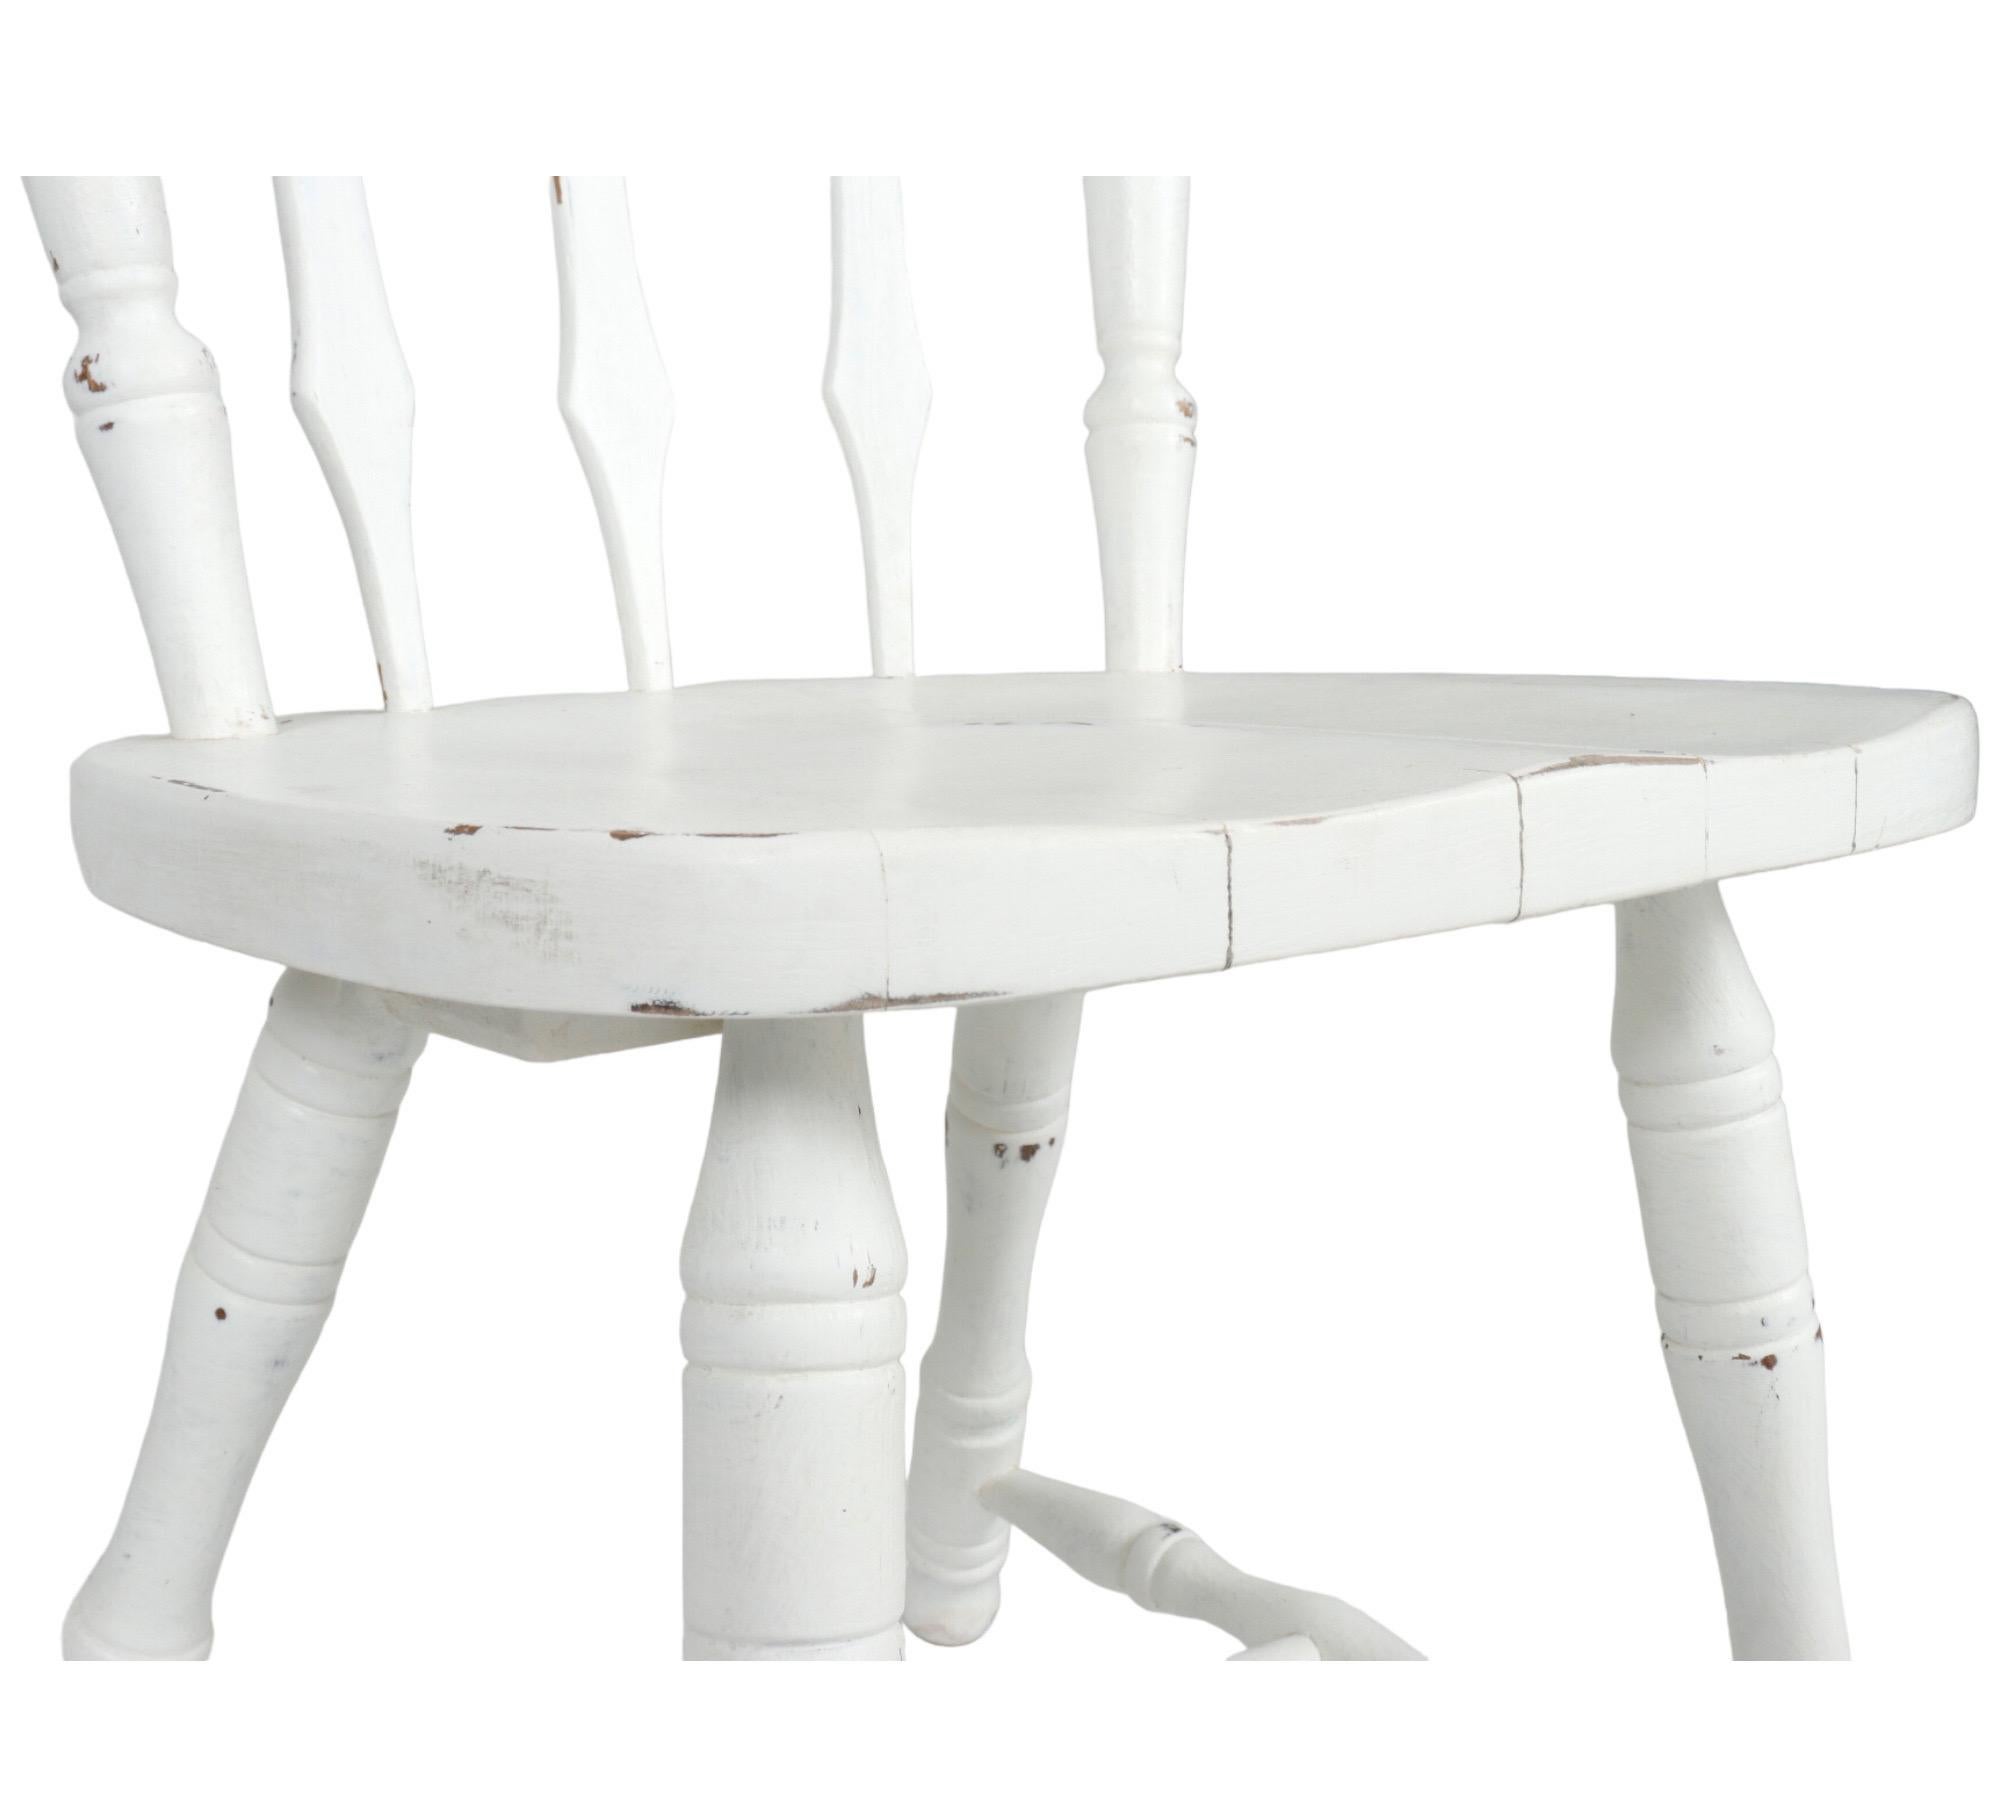 20th Century White Farmhouse Table with Four Chairs For Sale